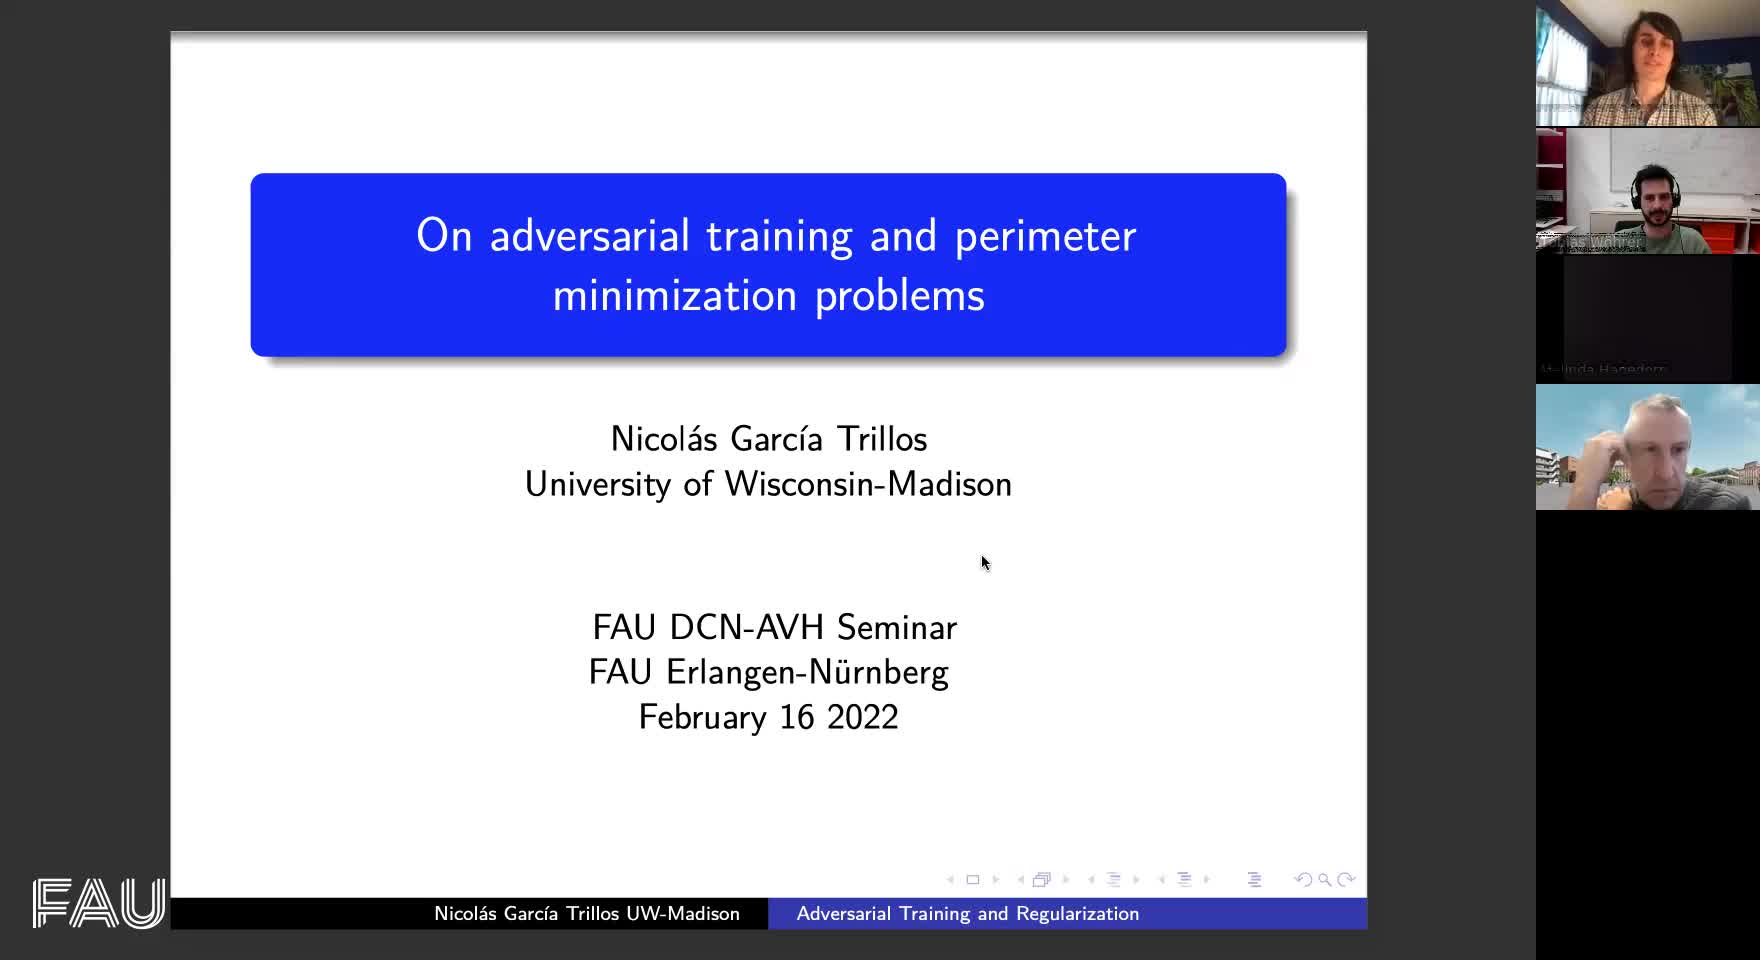 On adversarial training and perimeter minimization problems (G. Trillos, University of Wisconsin-Madison) preview image